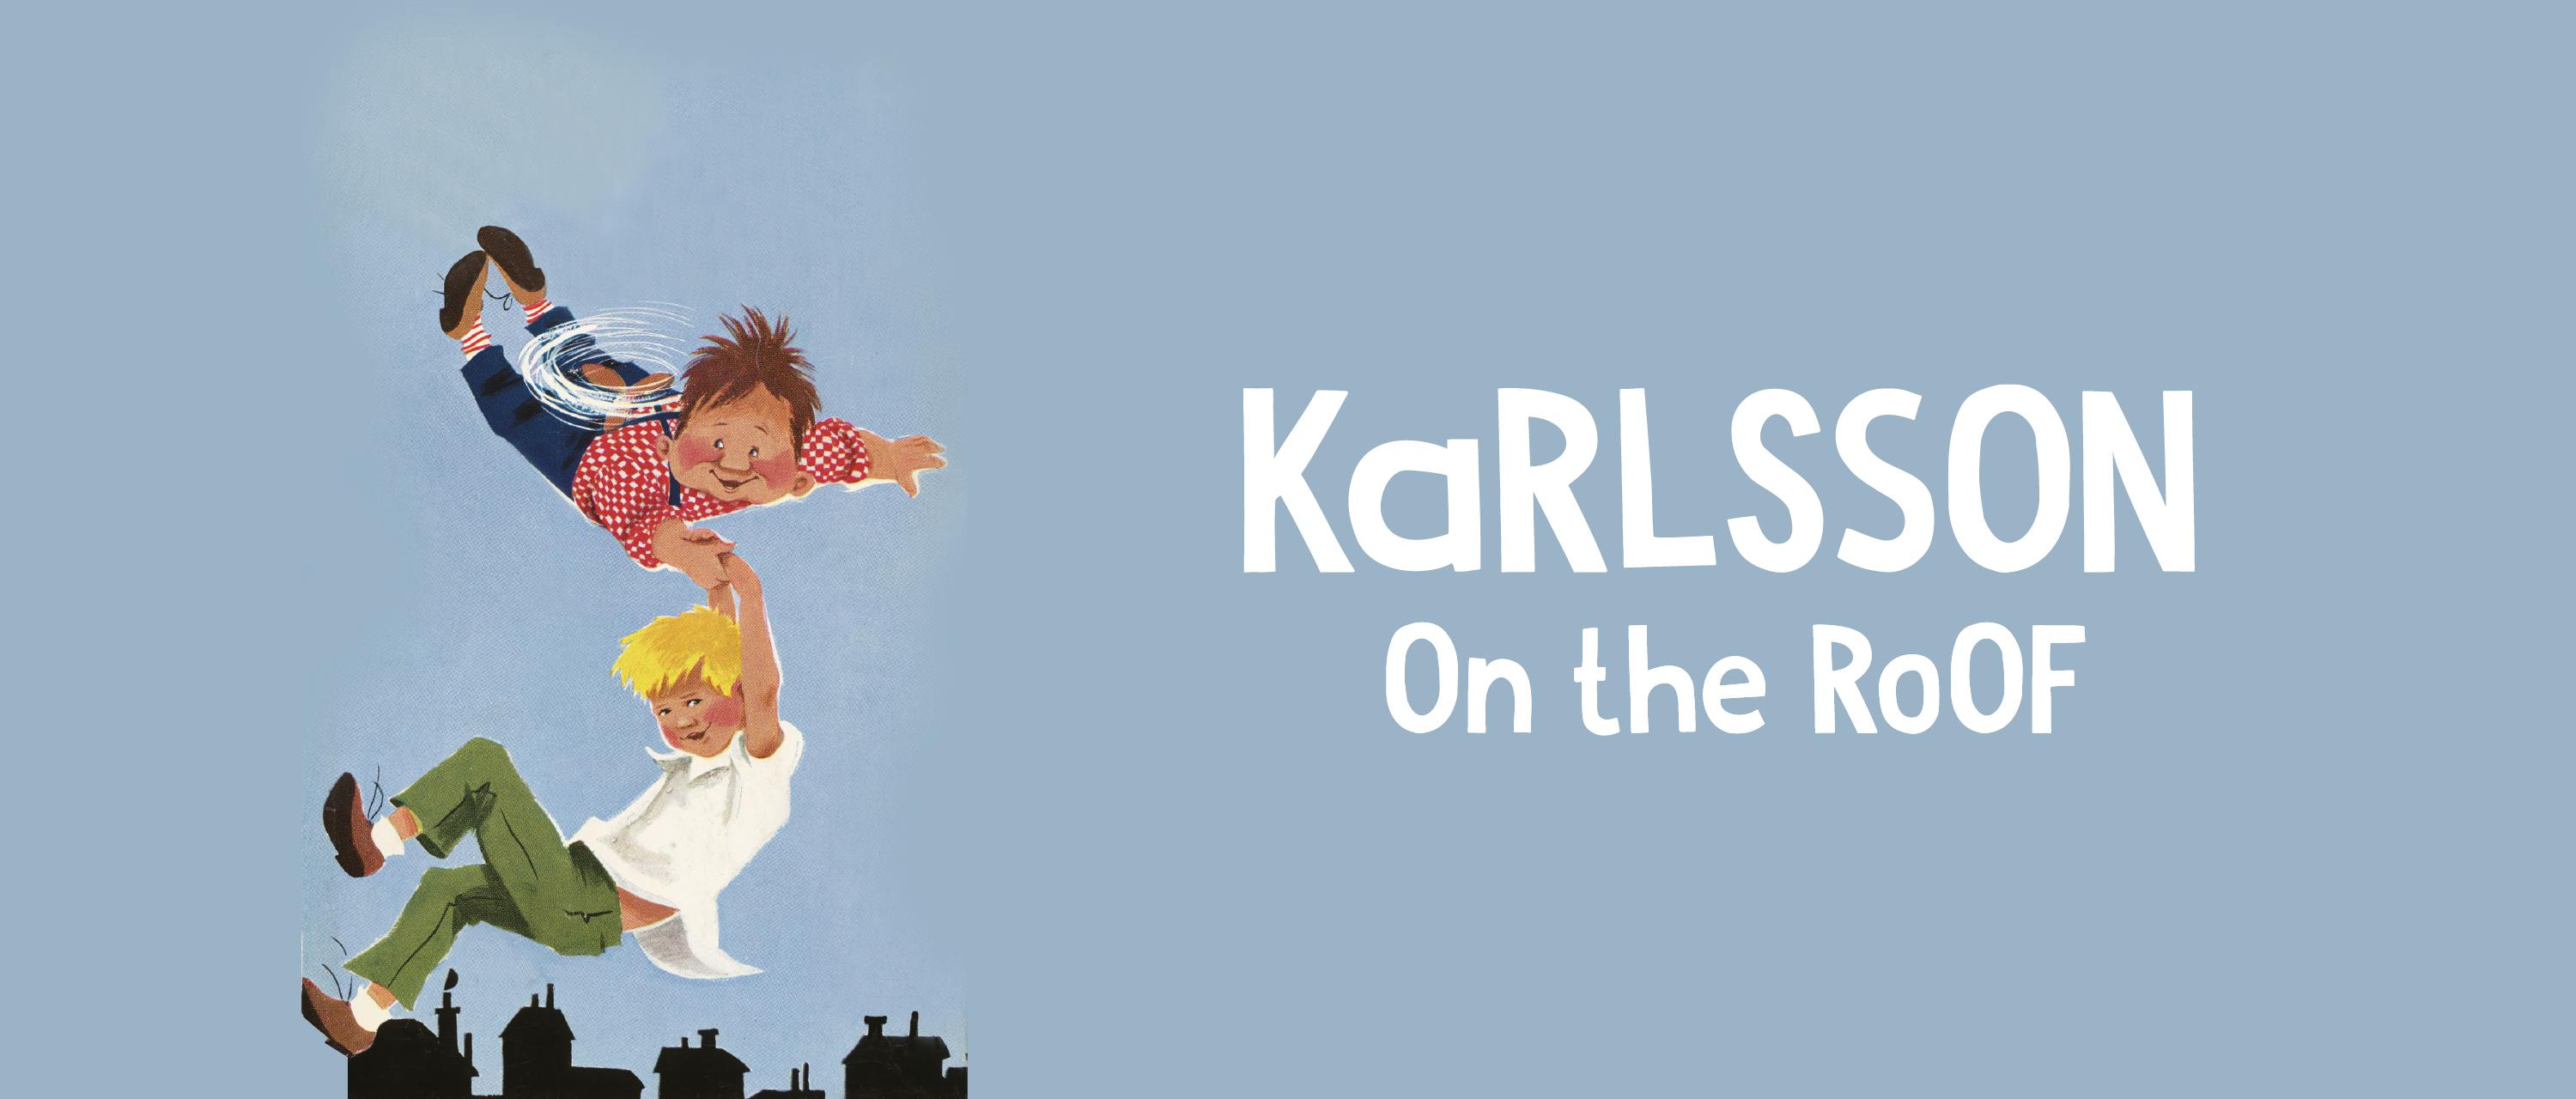 Karlsson on the roof, with logotype